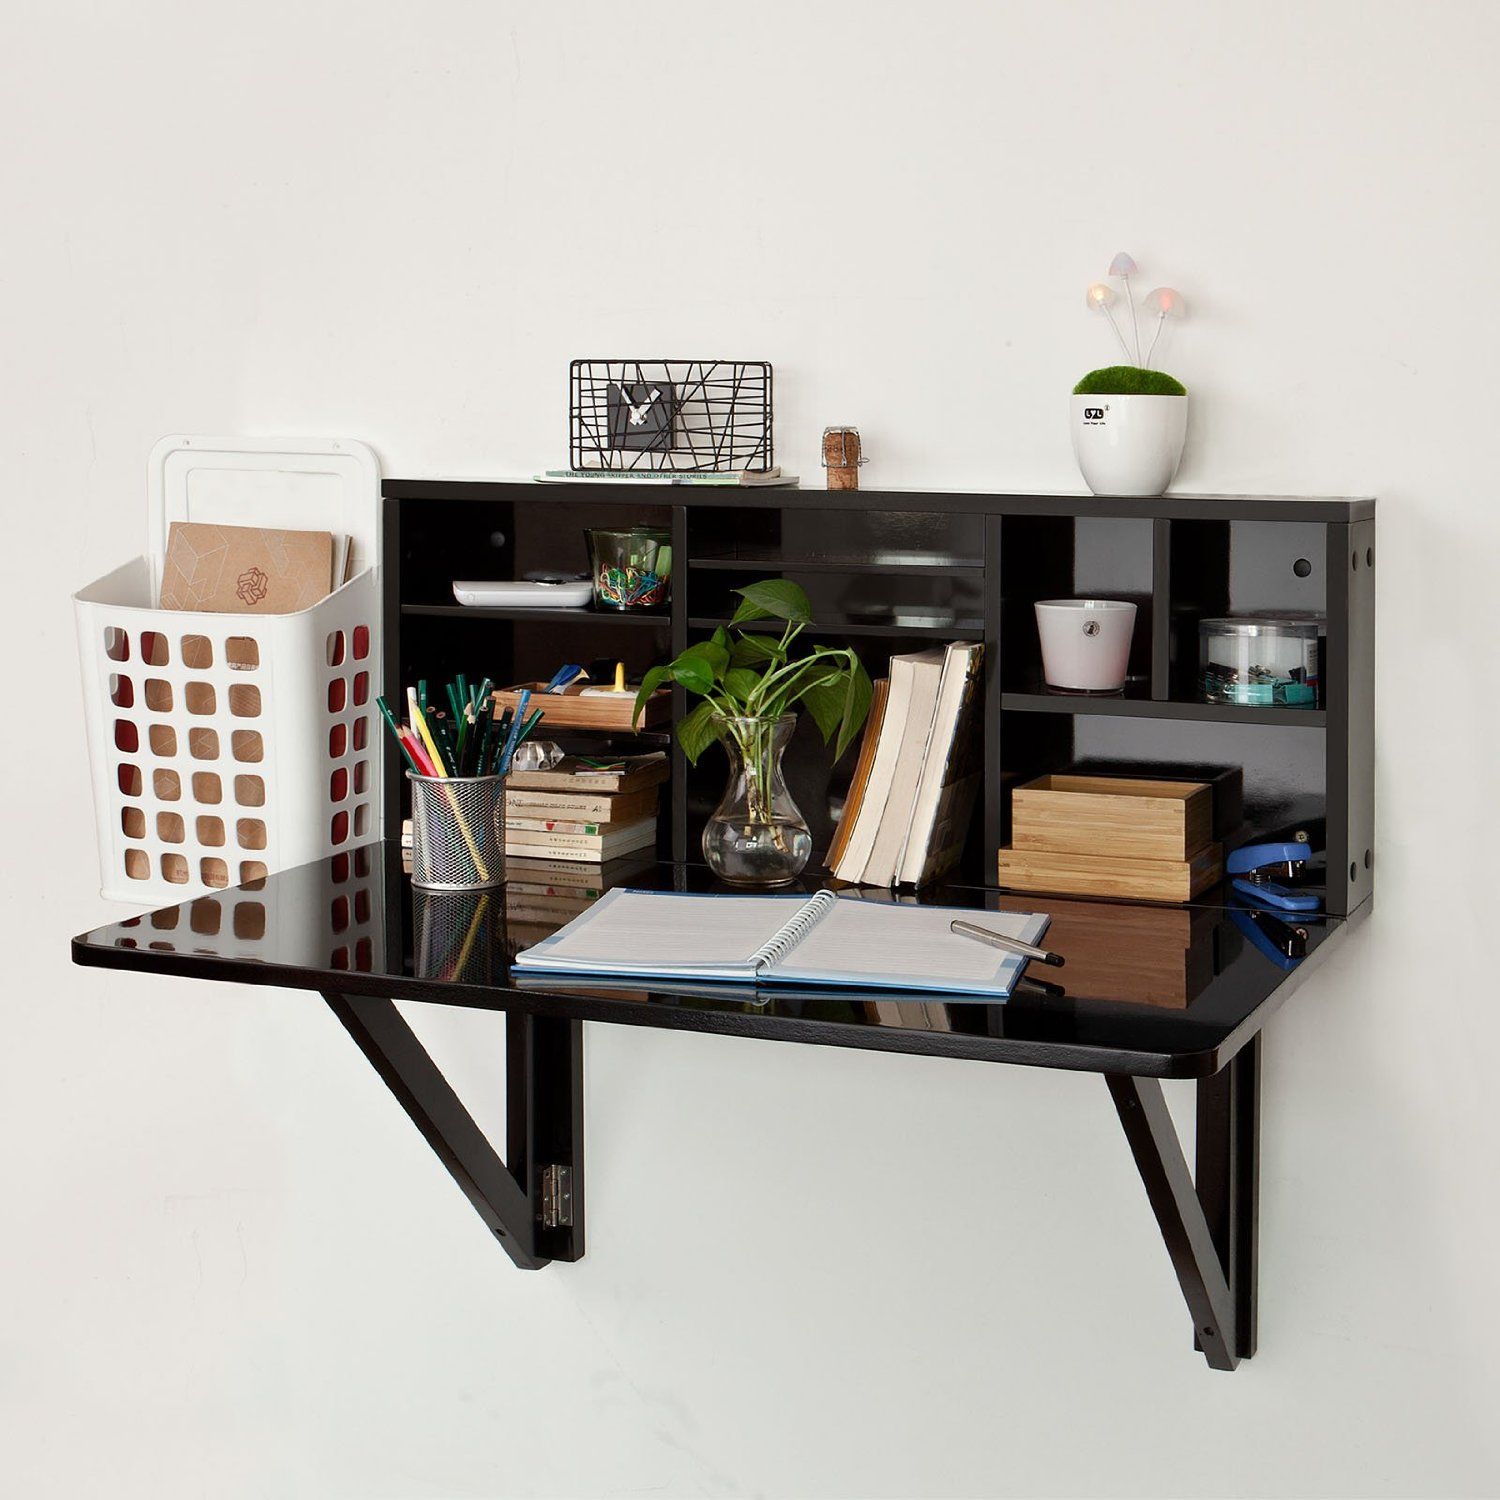 wall mounted desk with shelves photo - 6